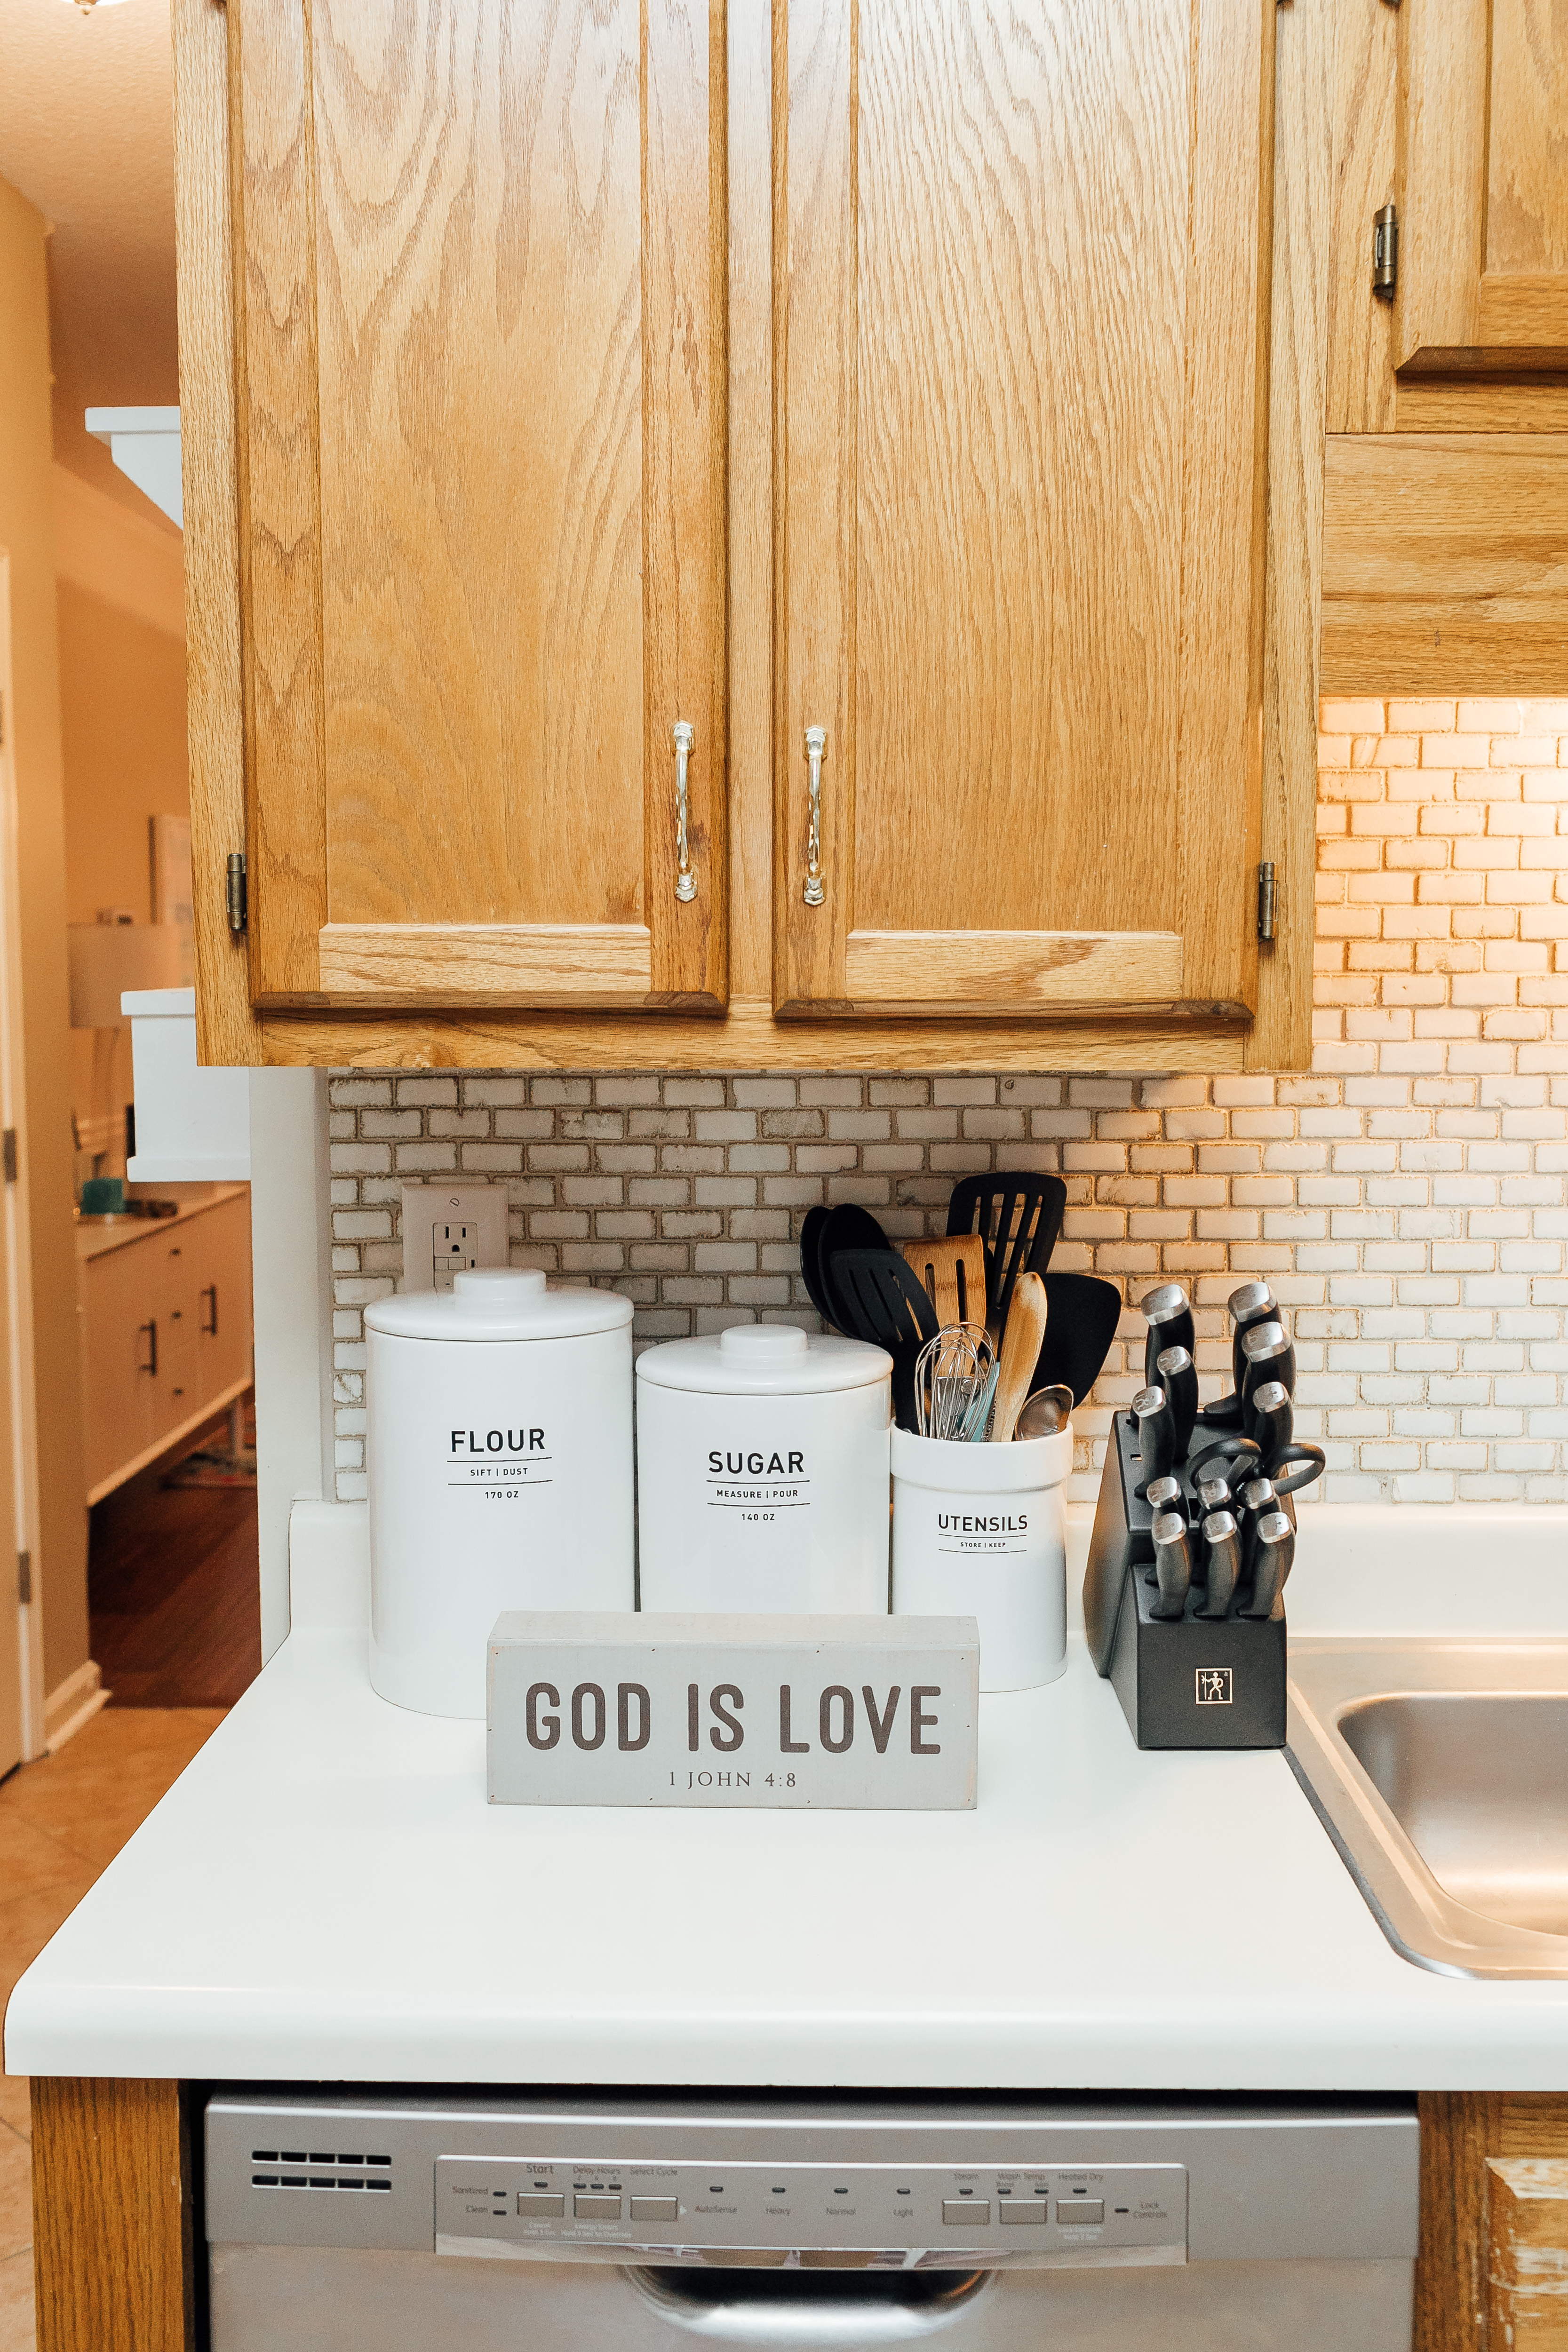 How to Update Your Home on a Budget featured by top US lifestyle blog, Walking in Memphis in High Heels: new kitchen backsplash